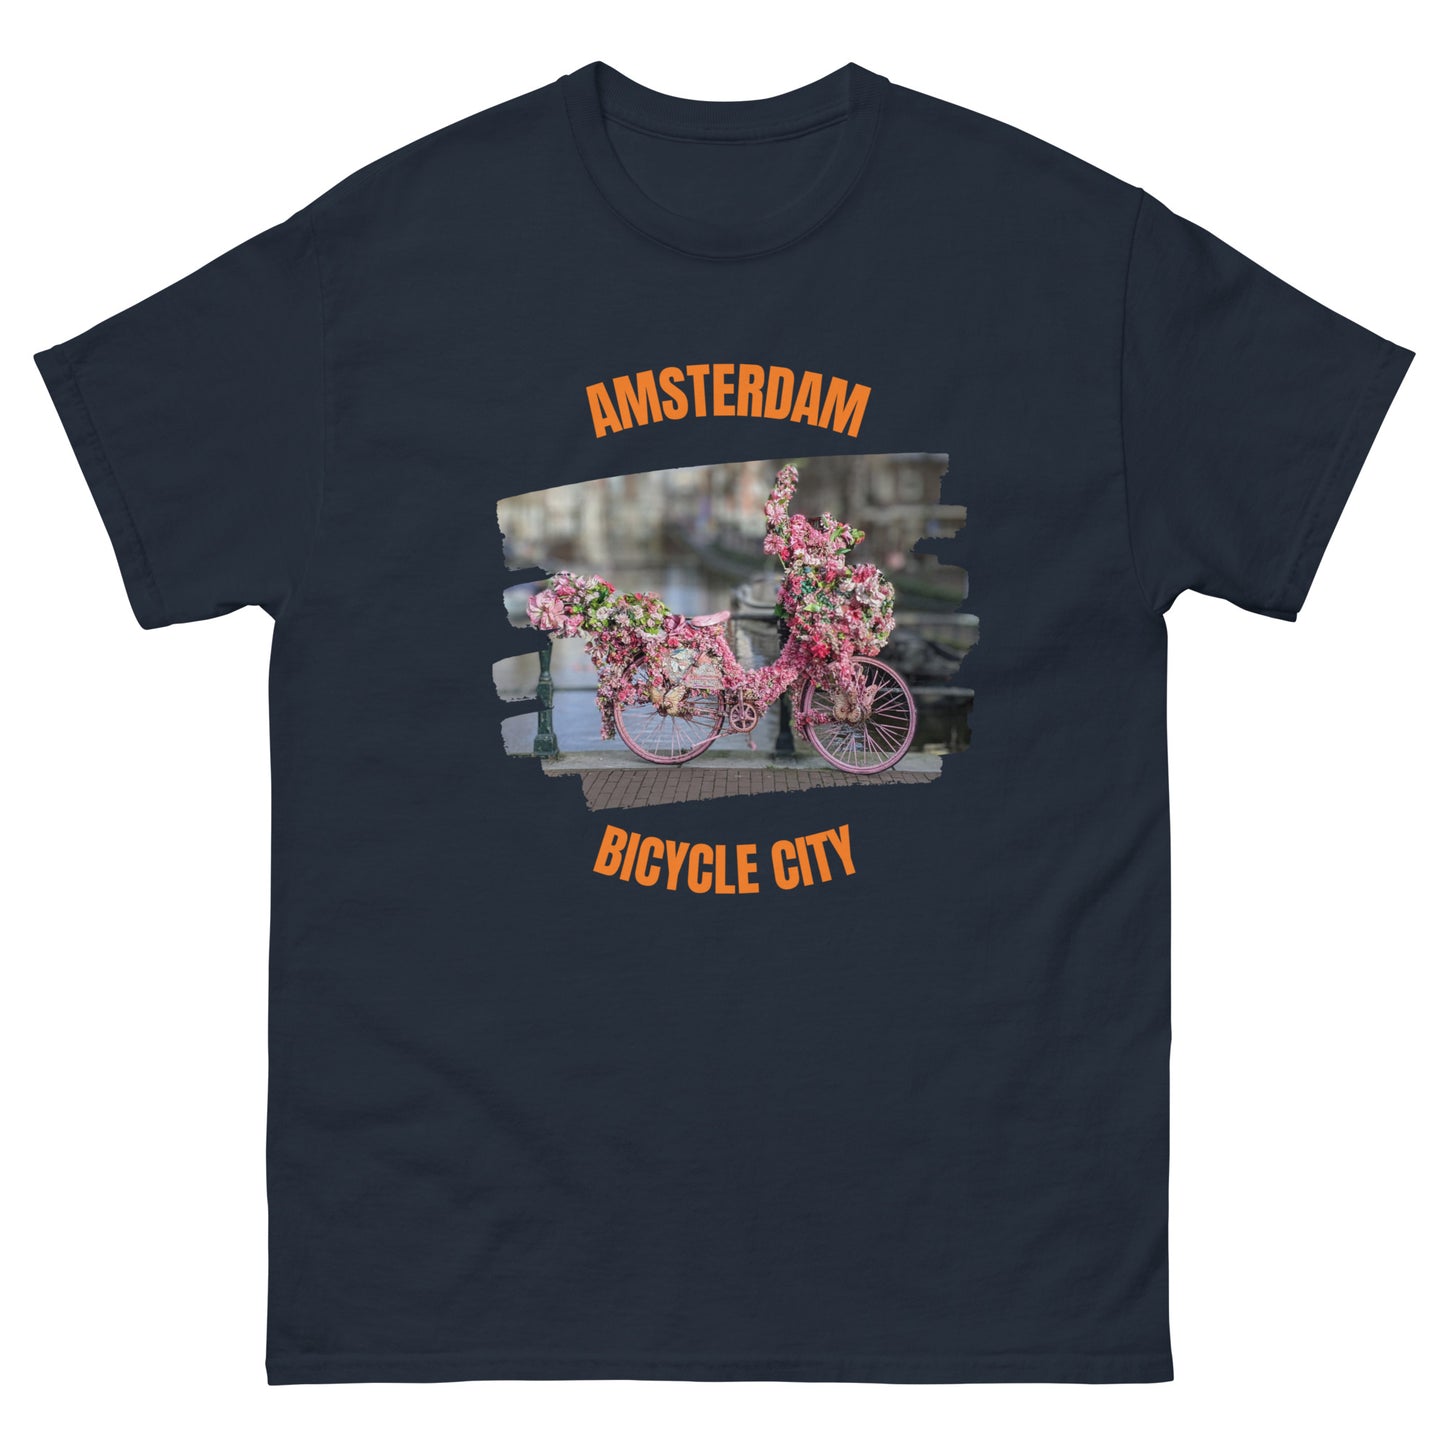 A charming unisex t-shirt with a stylish Amsterdam bicycle decorated with vibrant flowers